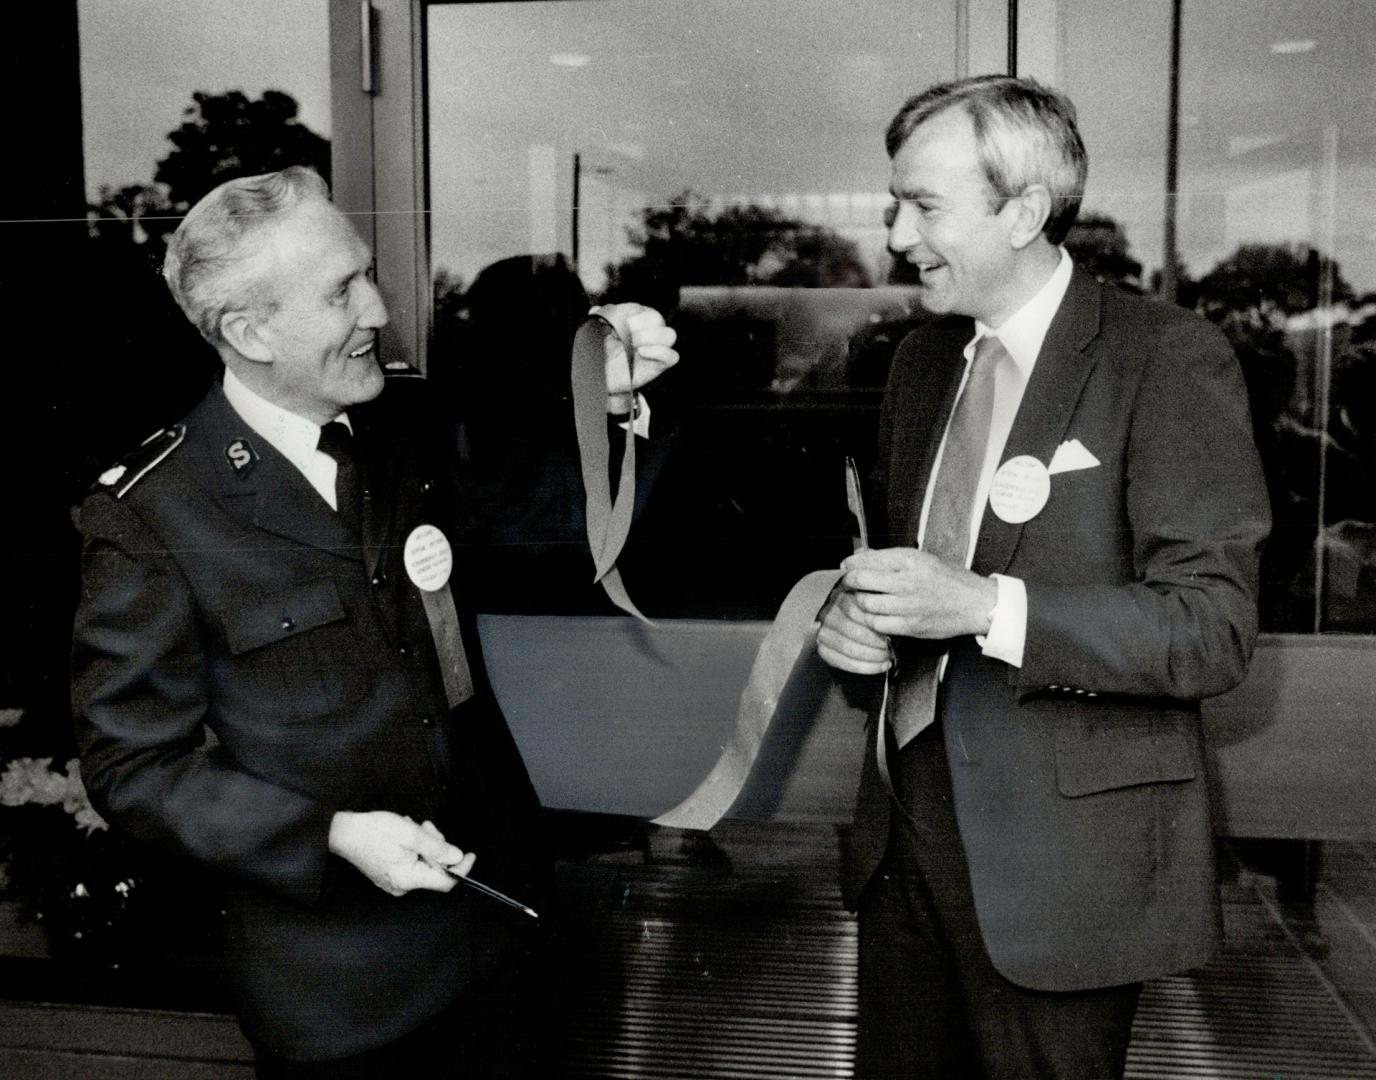 Ribbon cutting: Premier David Peterson, right, and Major Harold Thornhill, executive director of the hospital, beam as they open the Salvation Army's 10th Canadian hospital